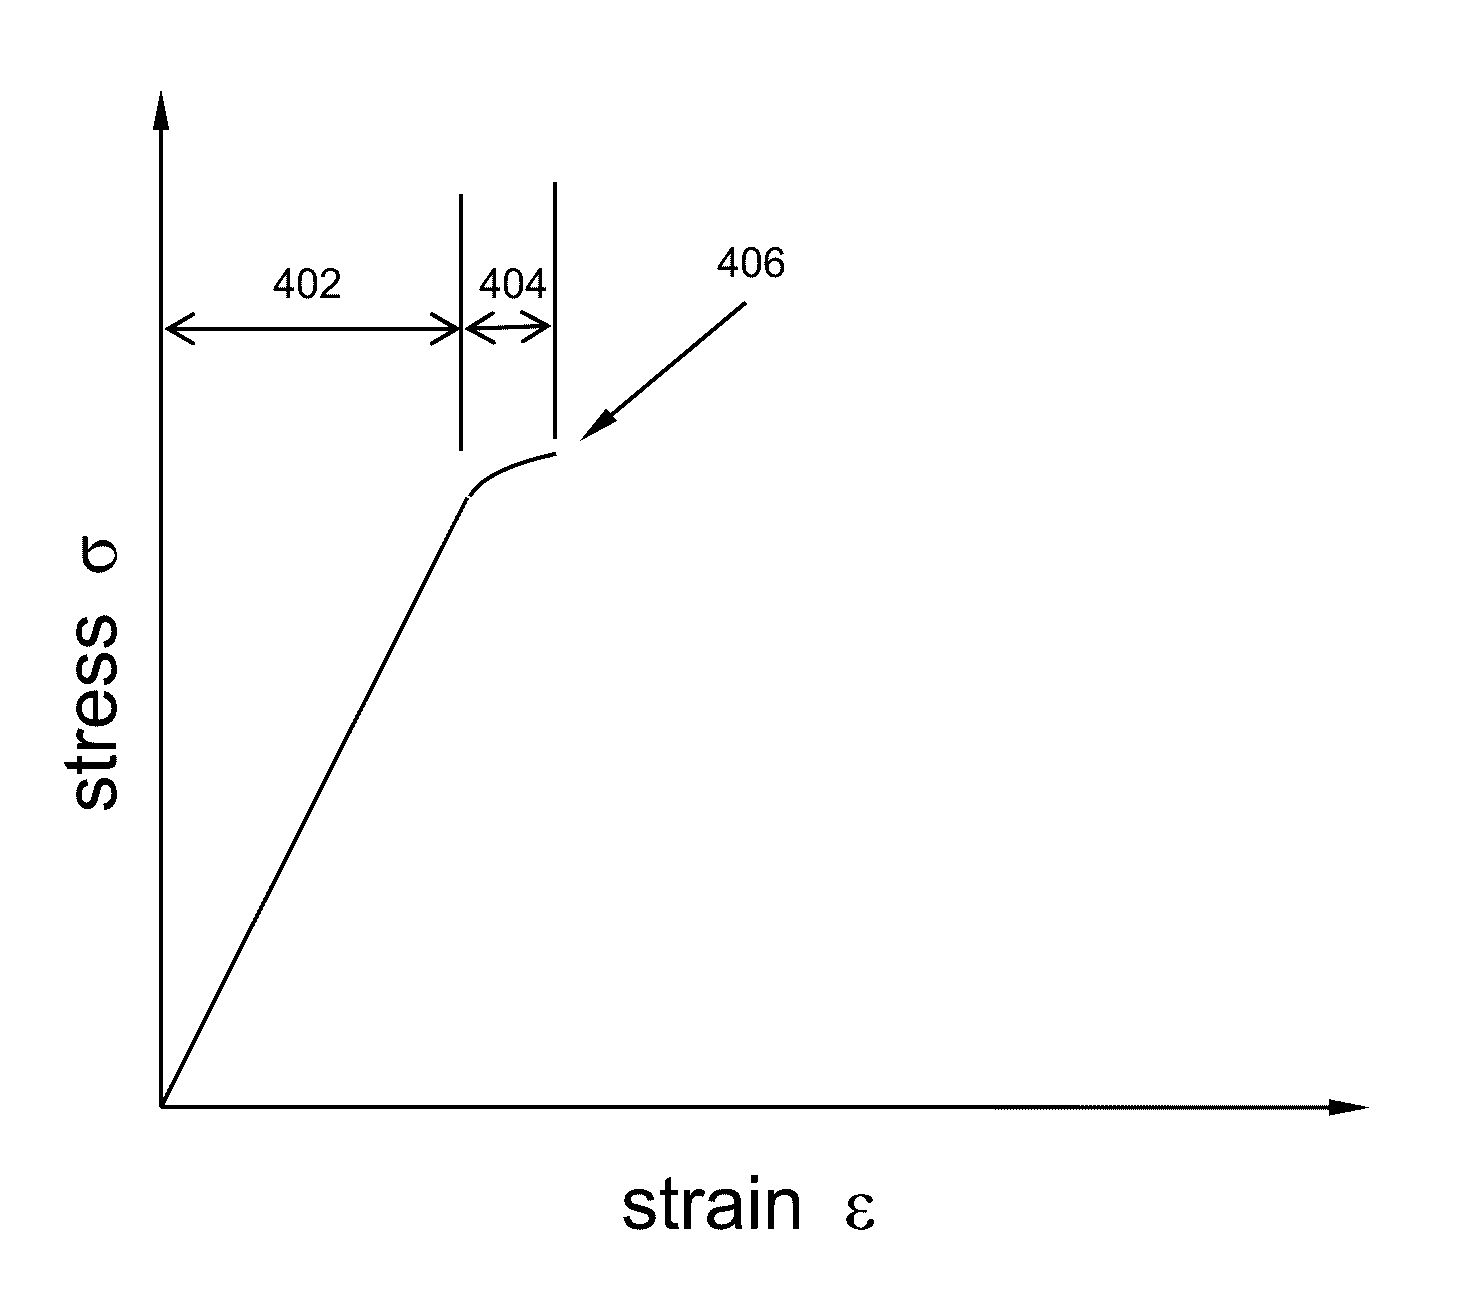 Meshfree Method And System For Numerically Simulating Brittle Material Based On Damage Mechanics